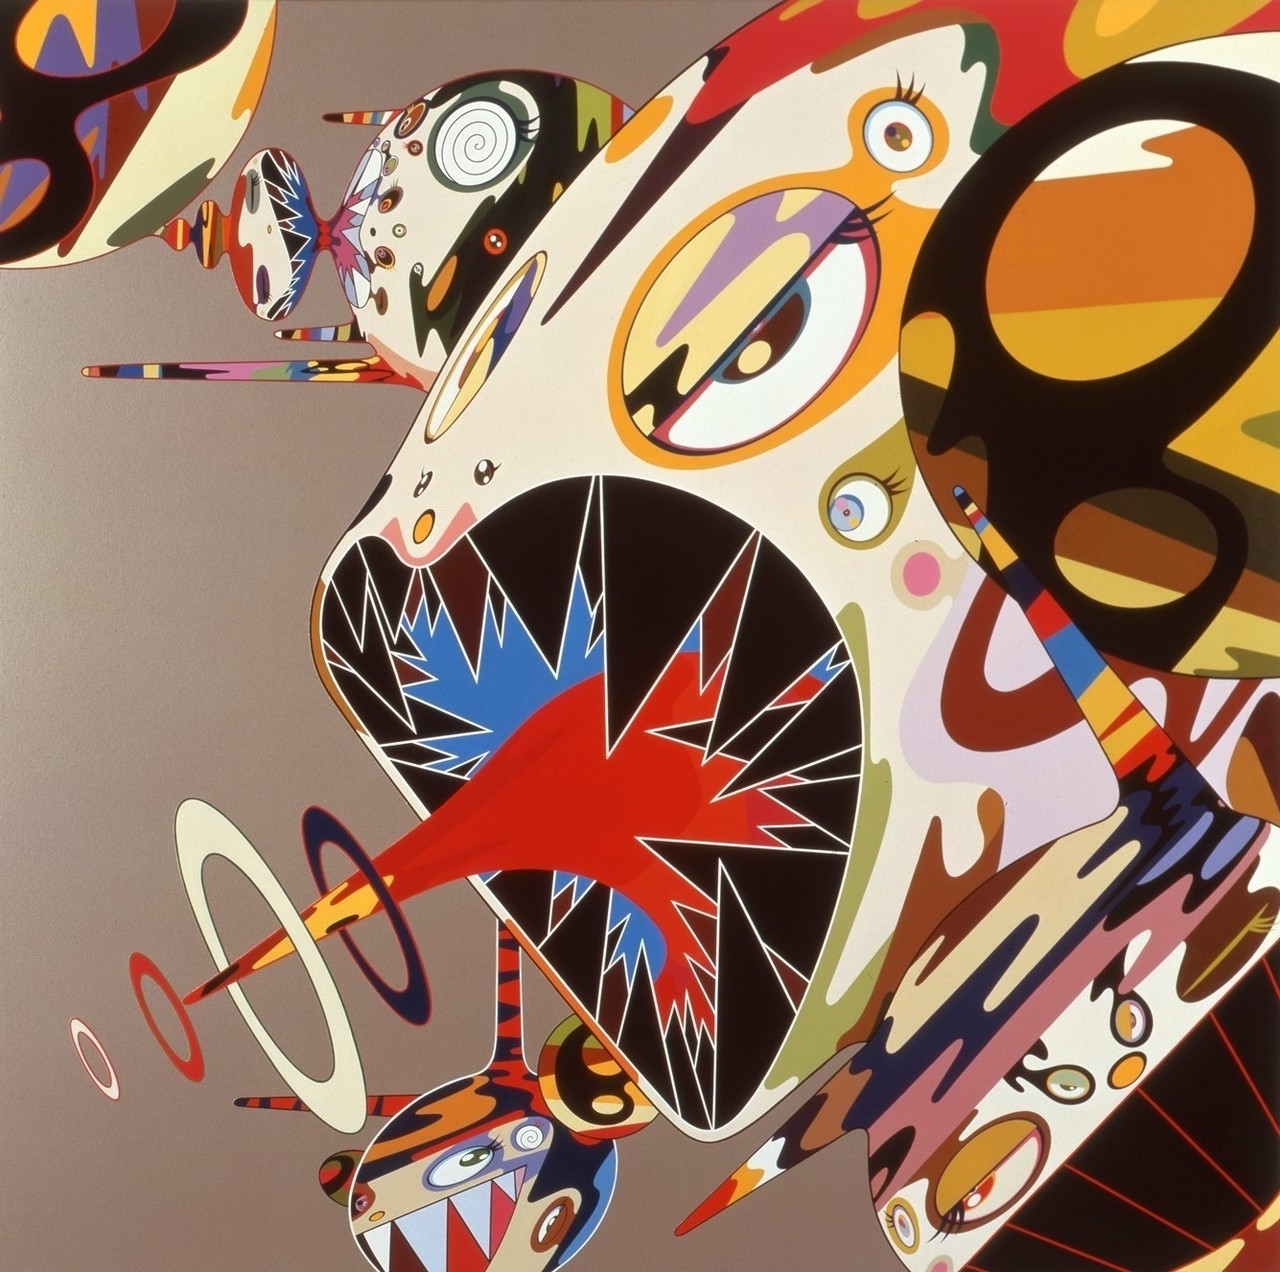 Takashi Murakami Blurs the Lines Between Low Culture and High Art